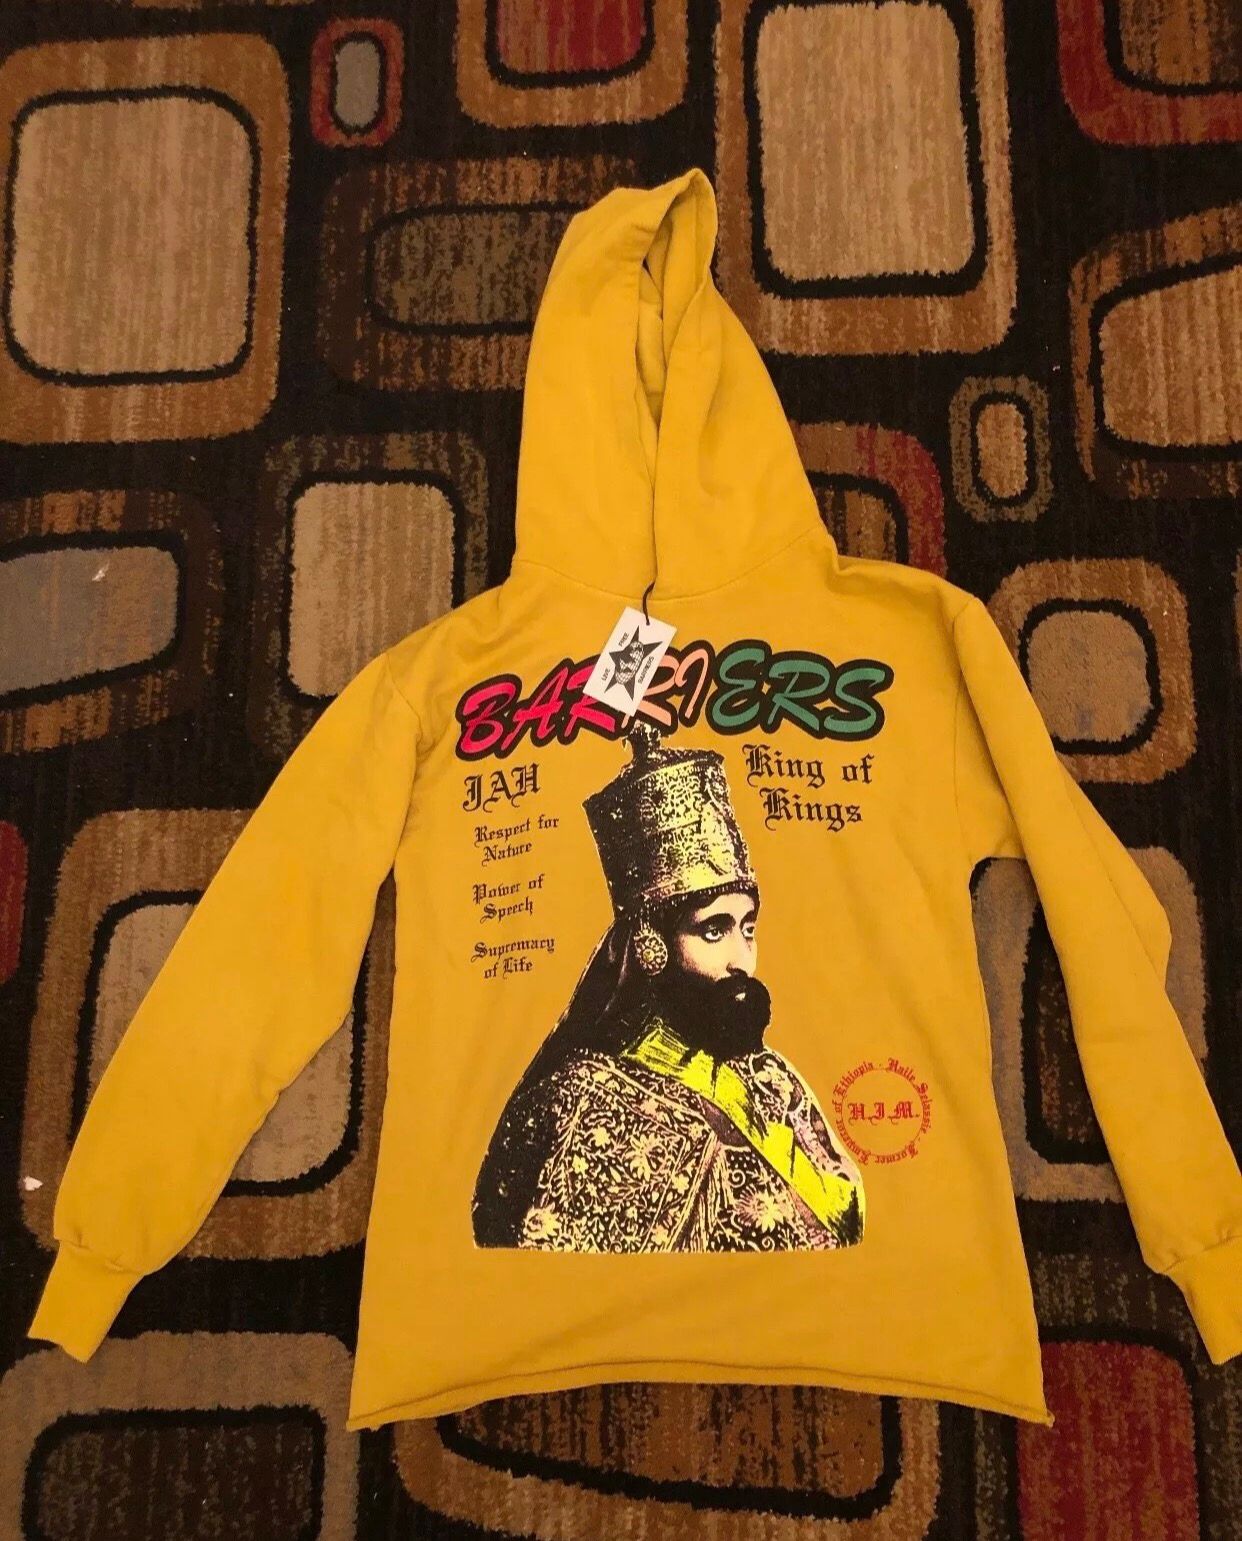 Barriers Barriers New York “Haile-Selassie” Hoodie Sz M Size US M / EU 48-50 / 2 - 1 Preview